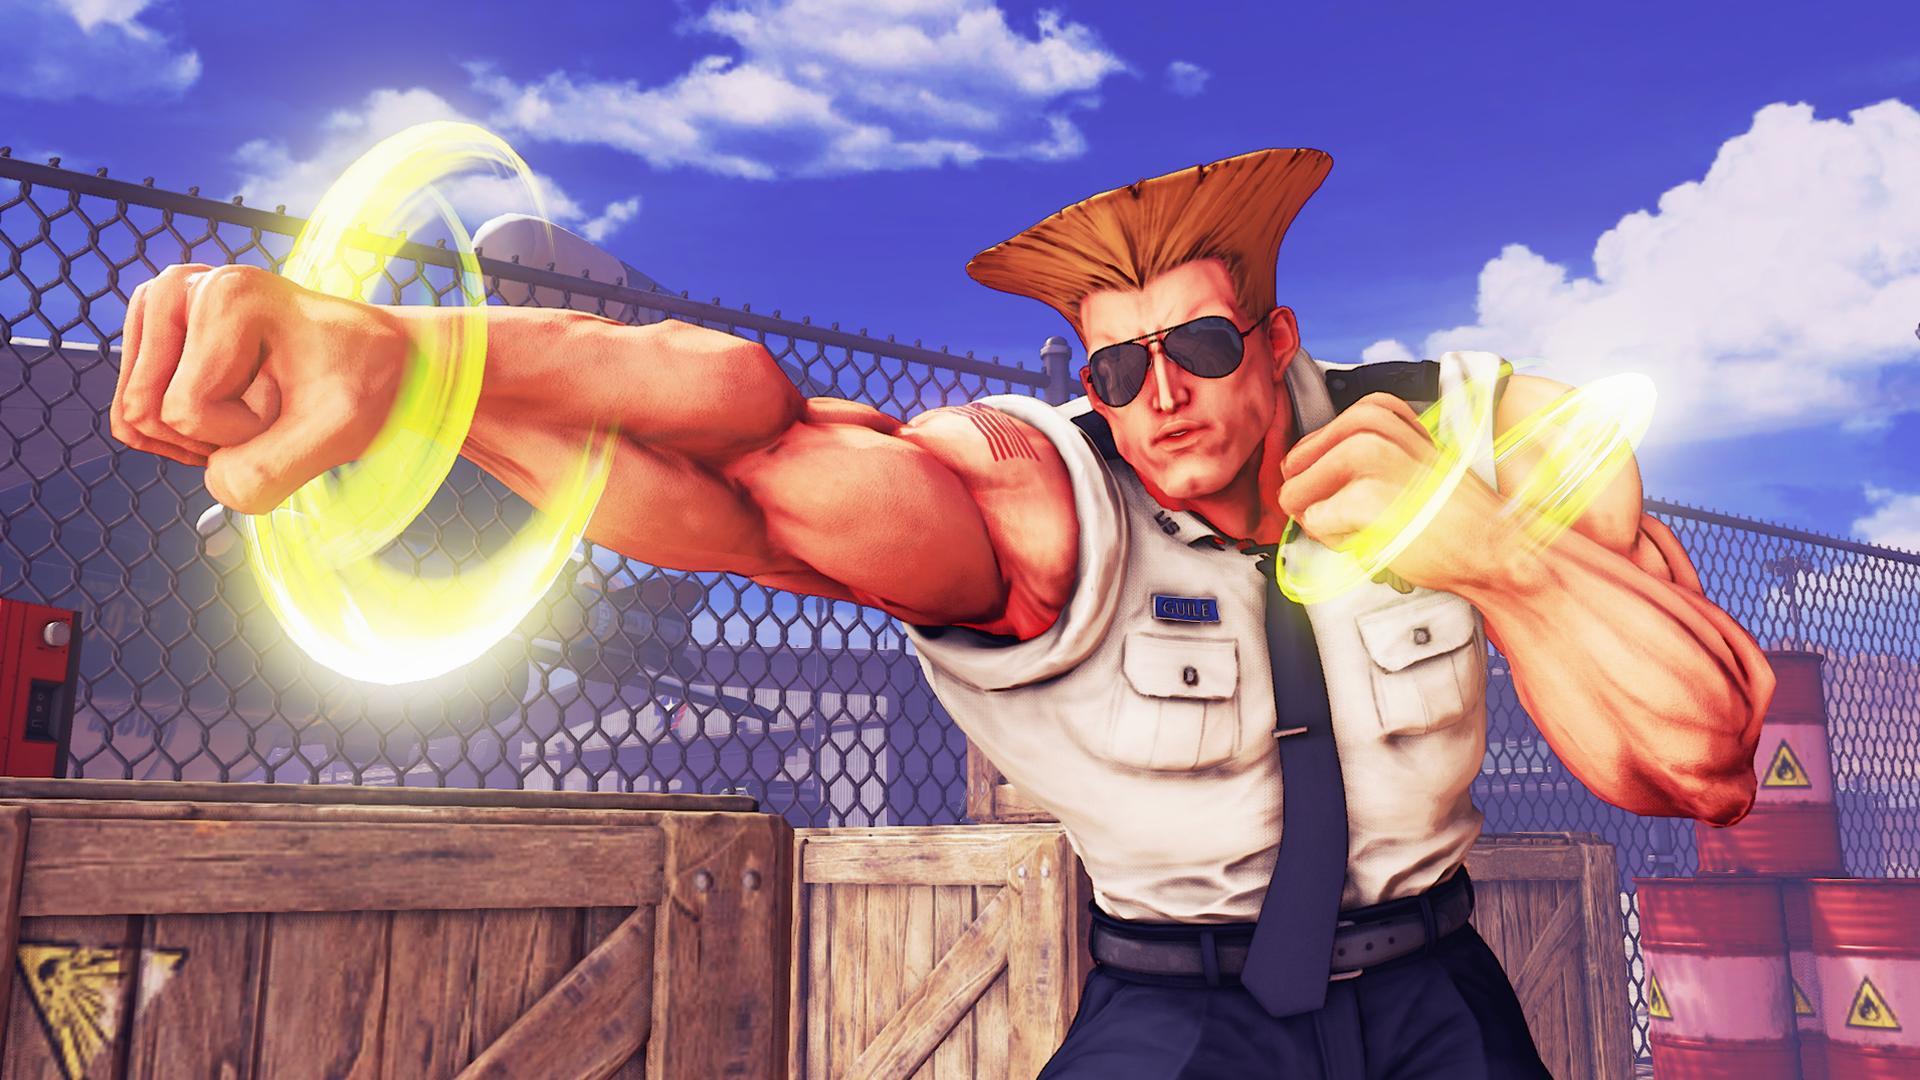 Guile Will Be Added to “Street Fighter V” In April - Rage Quit System Also Being Added